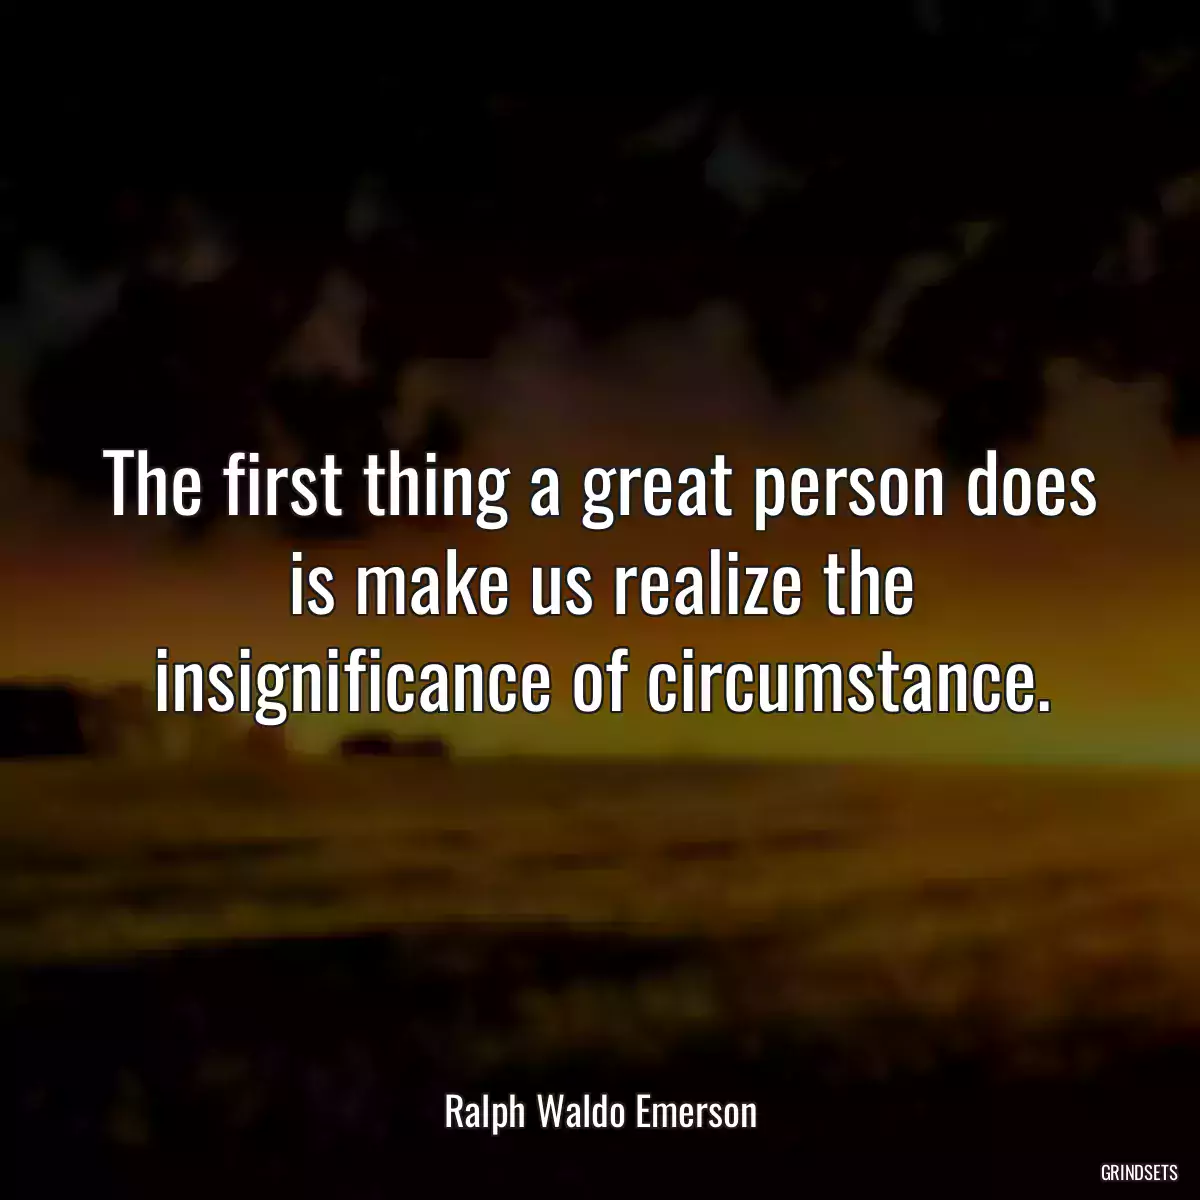 The first thing a great person does is make us realize the insignificance of circumstance.